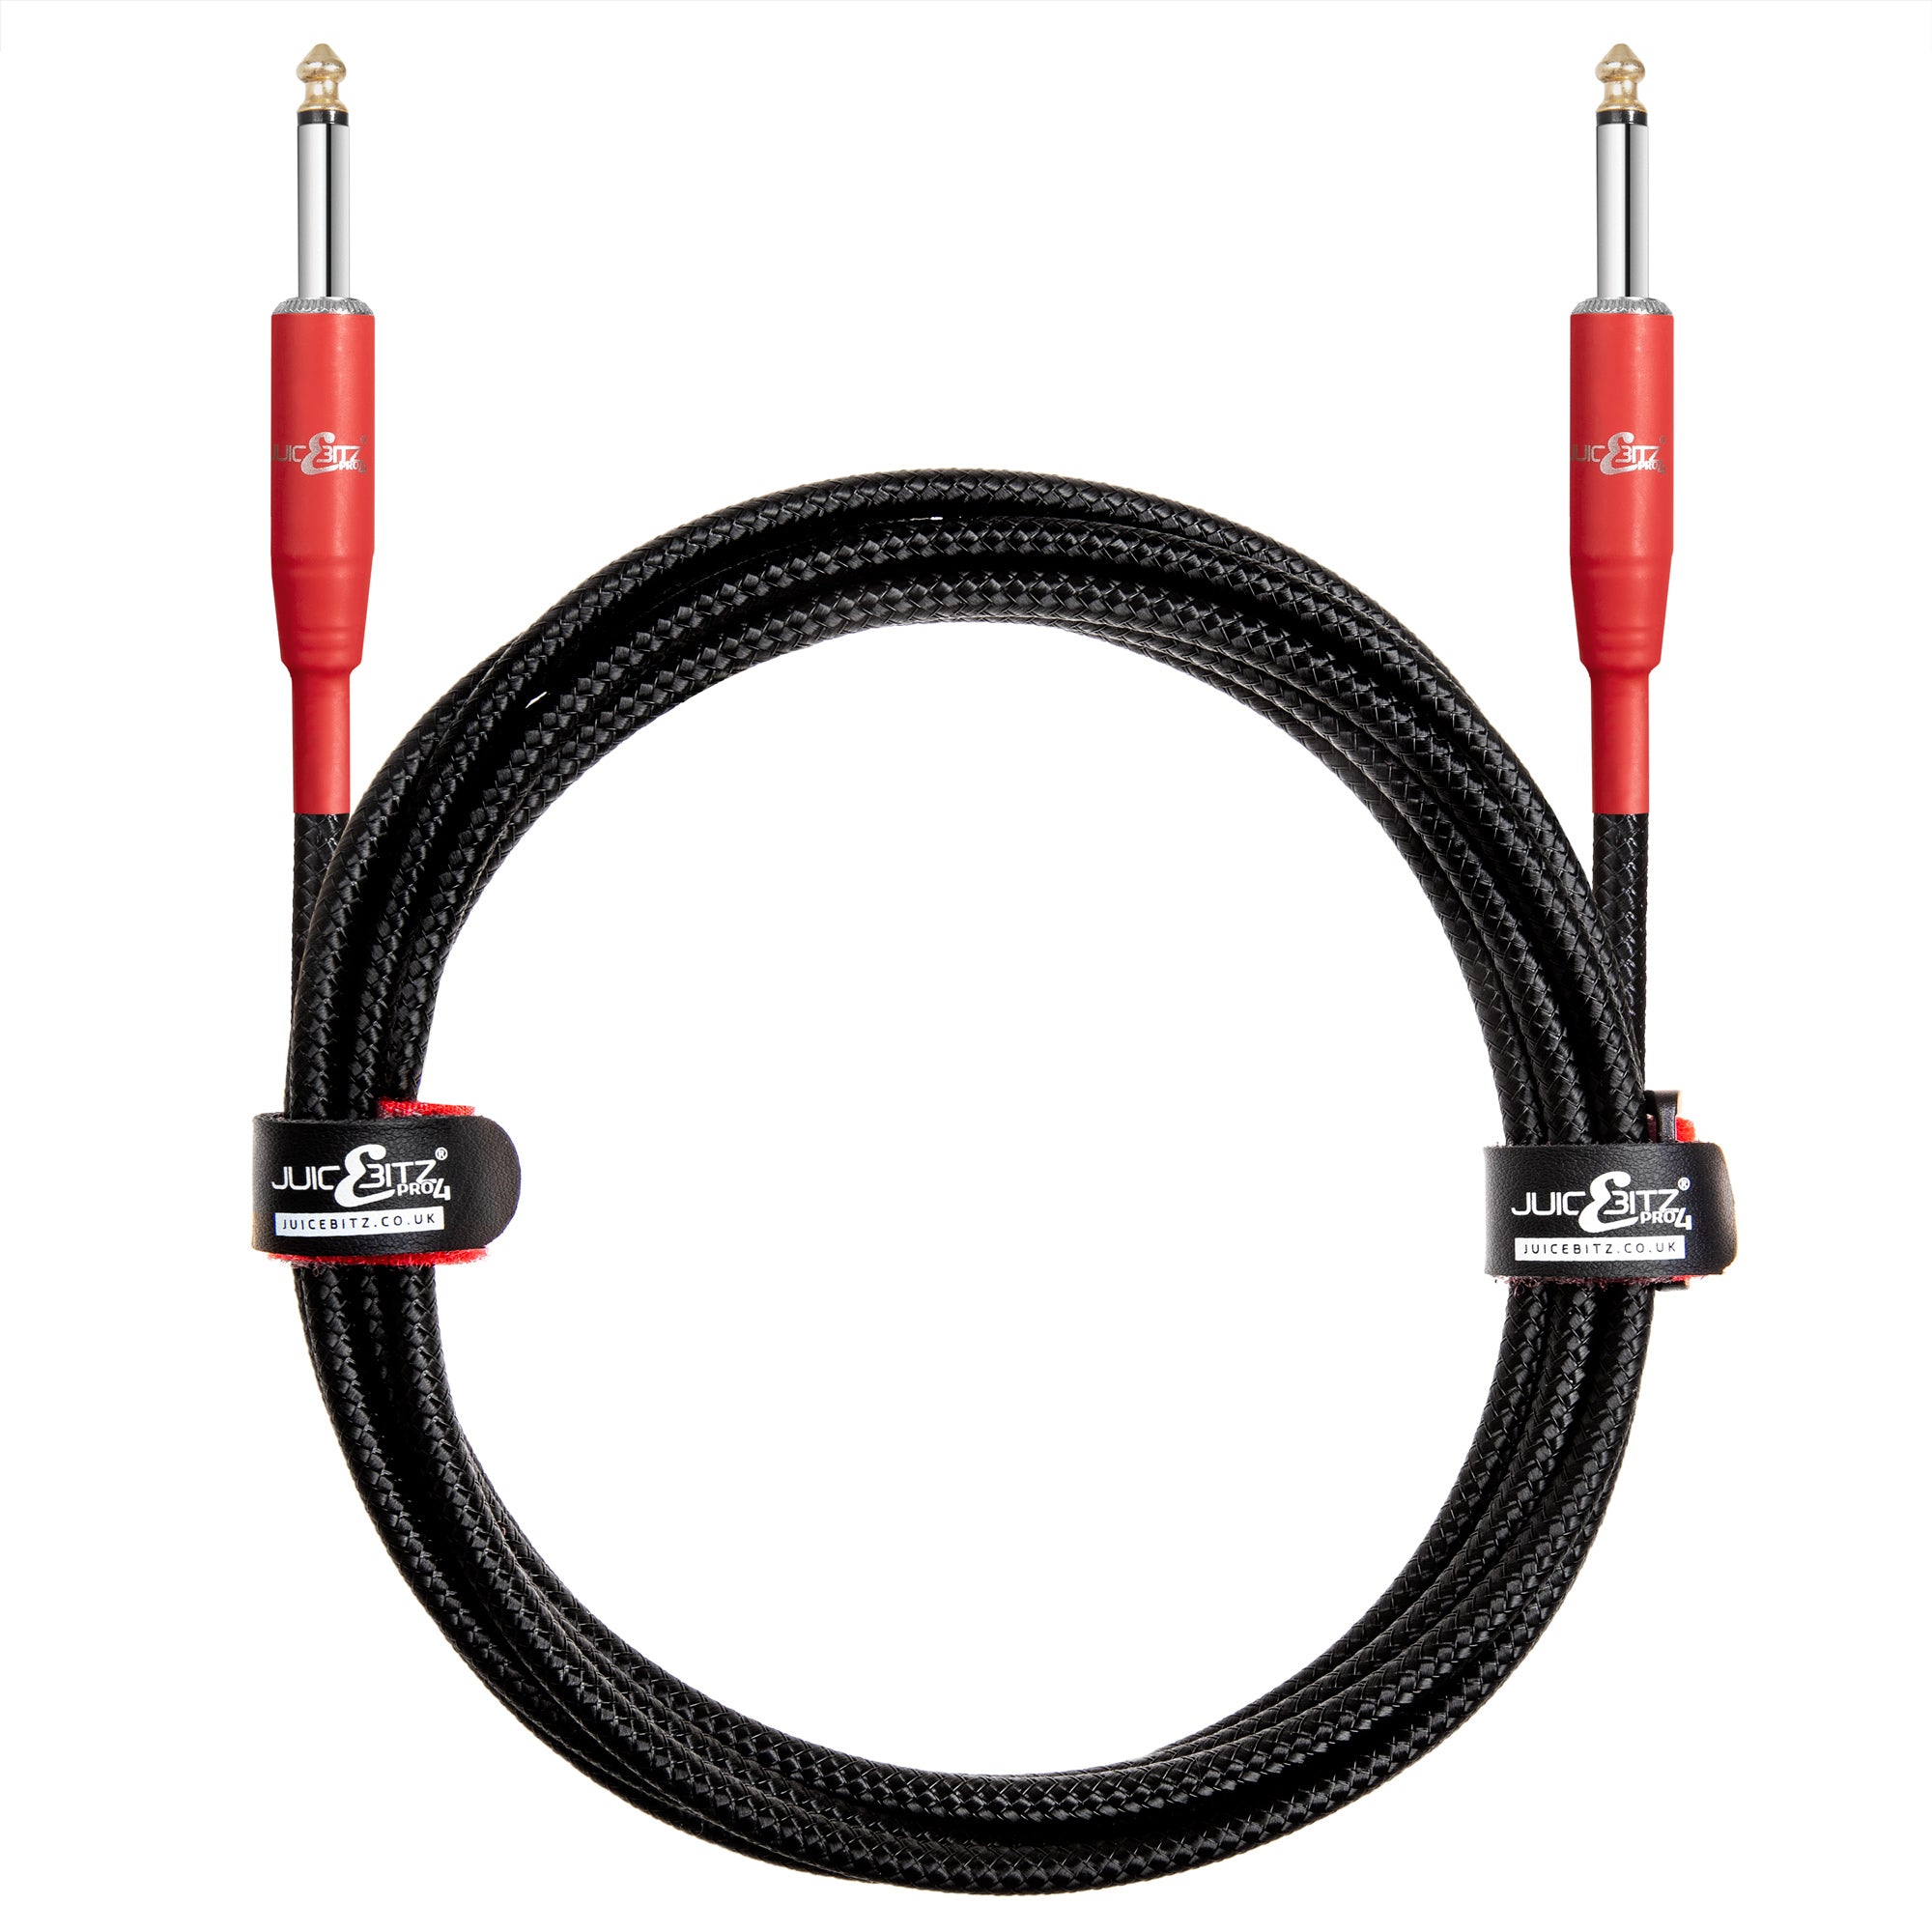 PRO Series Braided Guitar Cable 1/4" Straight Jack to Jack 6.35mm Lead - Black